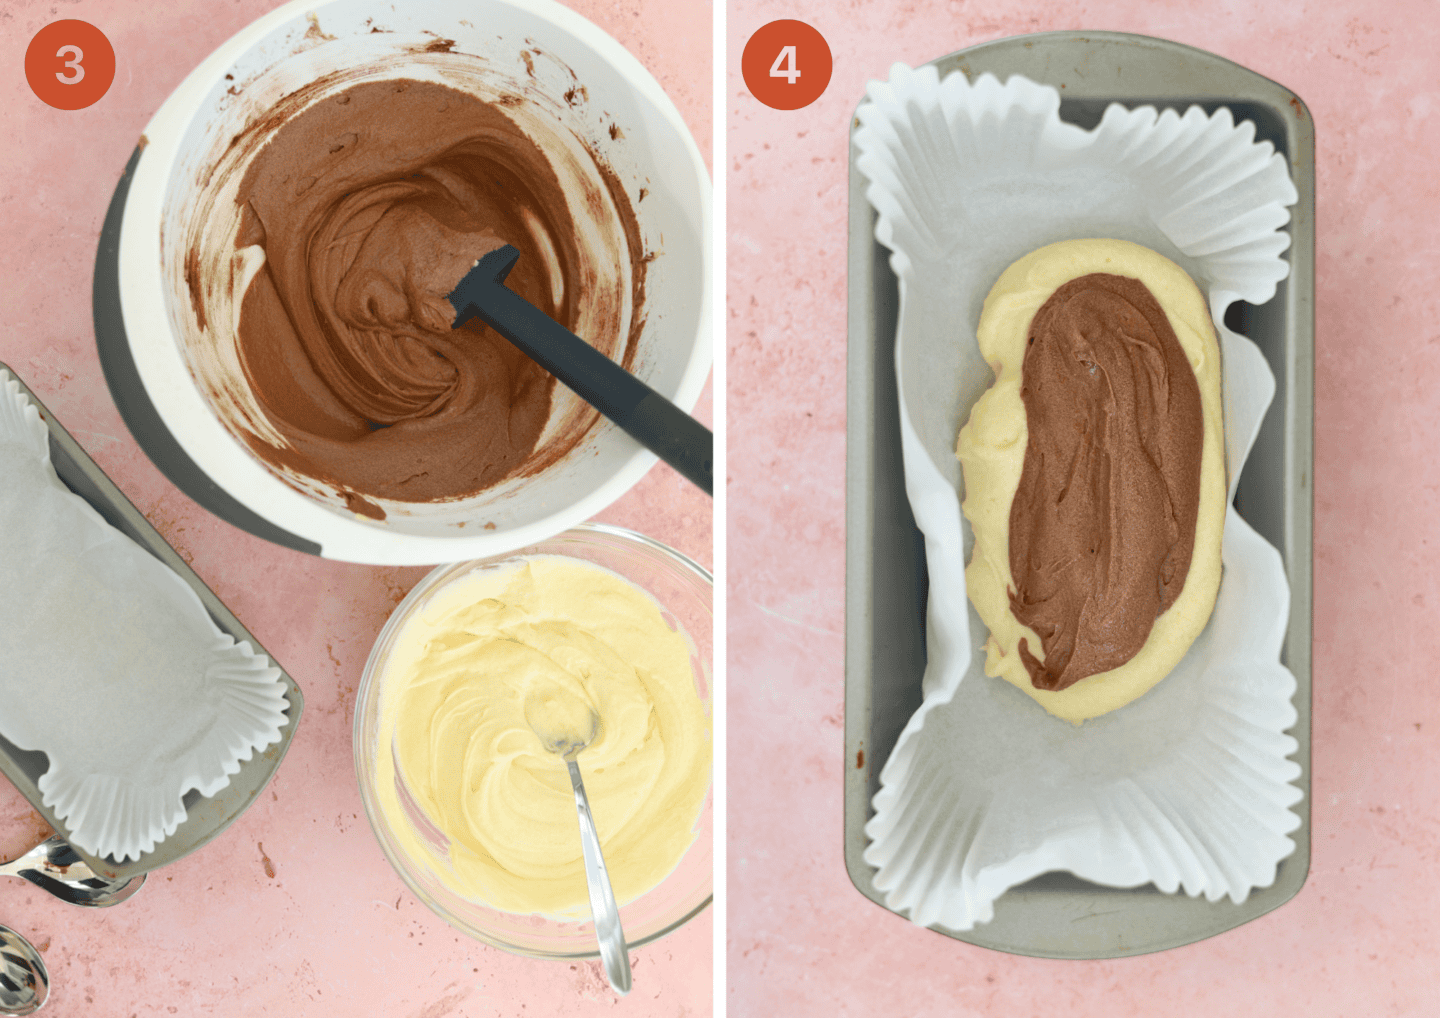 separate the marble cake mixture and add chocolate then marble the cake batter.